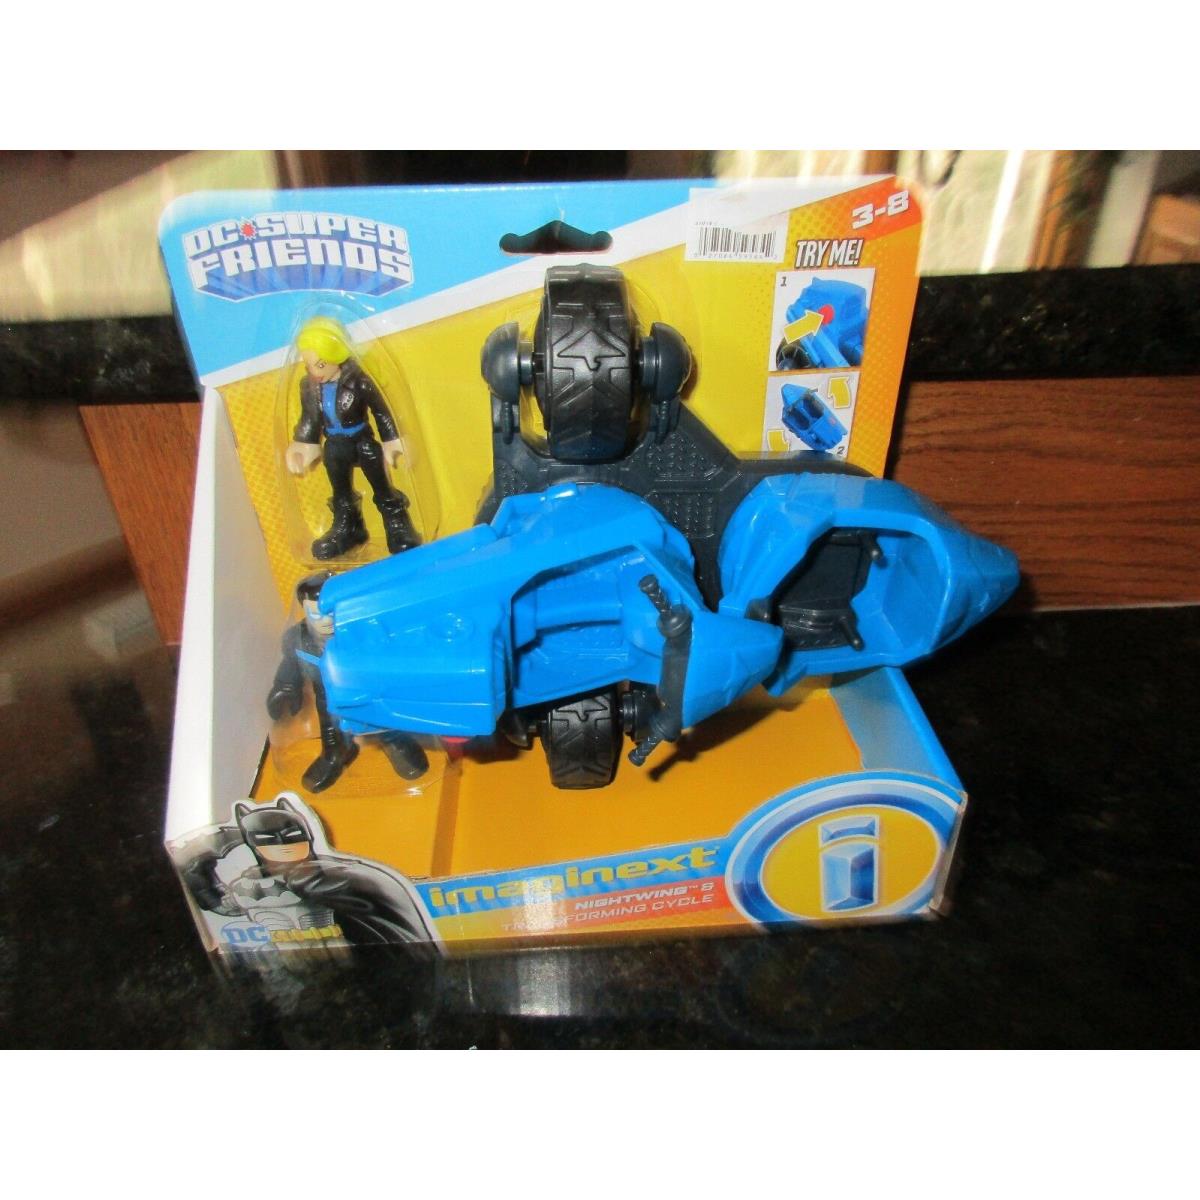 Imaginext Super Friends Fisher Price Nightwing Transforming Cycle Black Canary